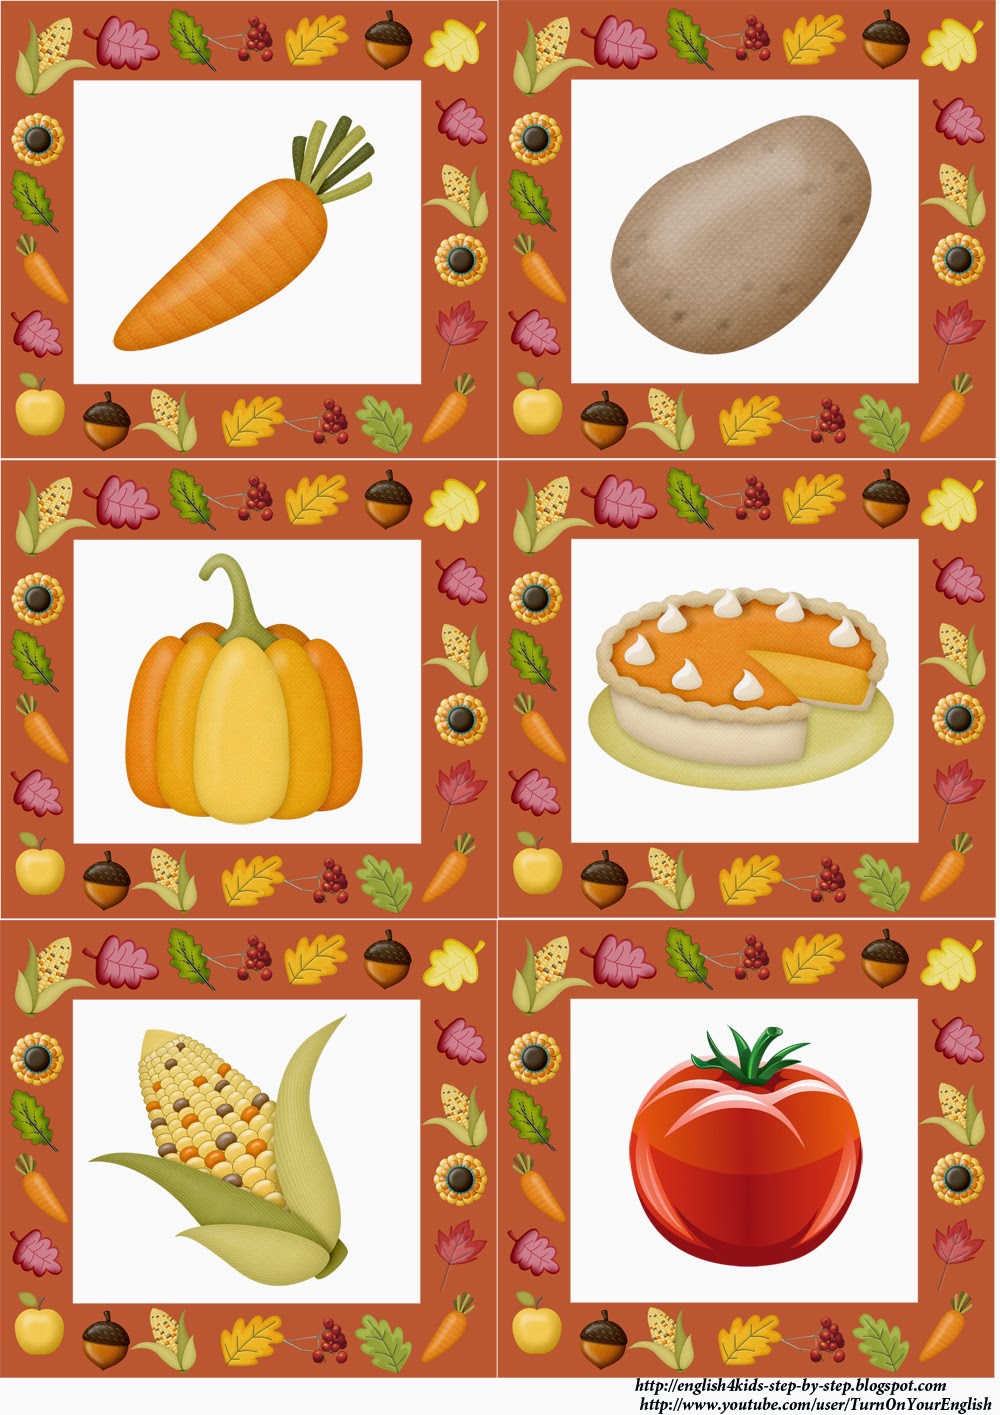 Fall Autumn Flashcards And Vocabulary Cards